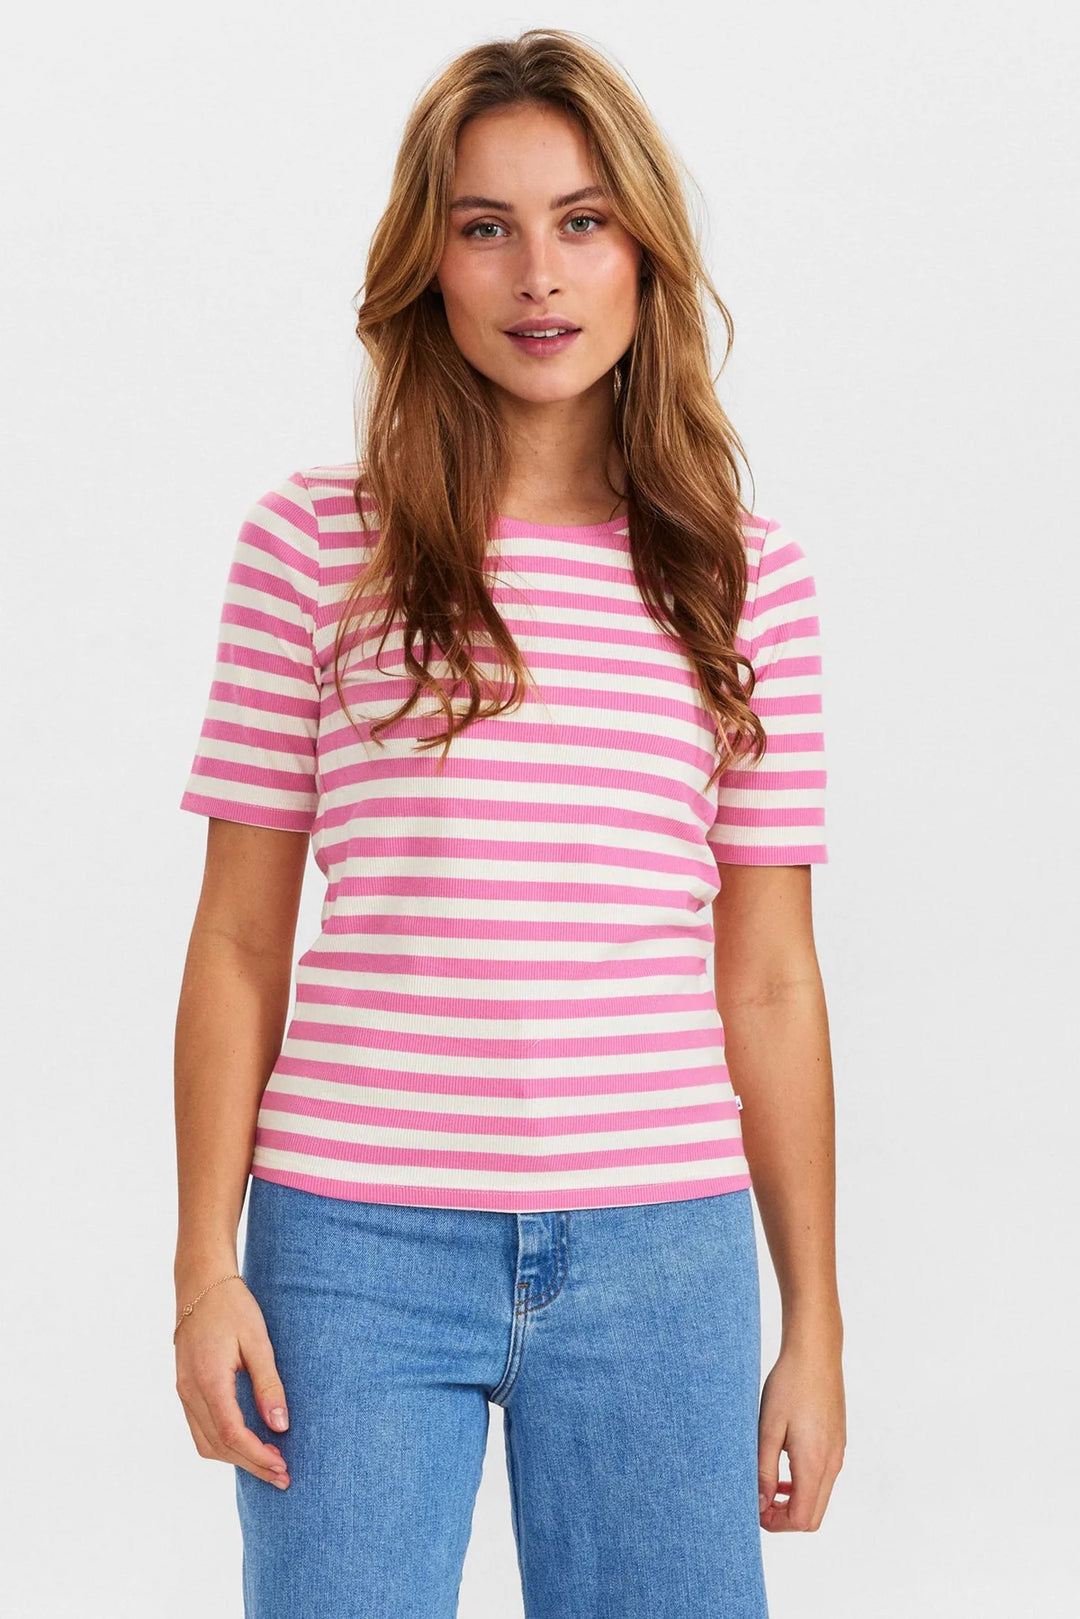 Numph Numicke 703032 Short Sleeve Striped Top Pink Front